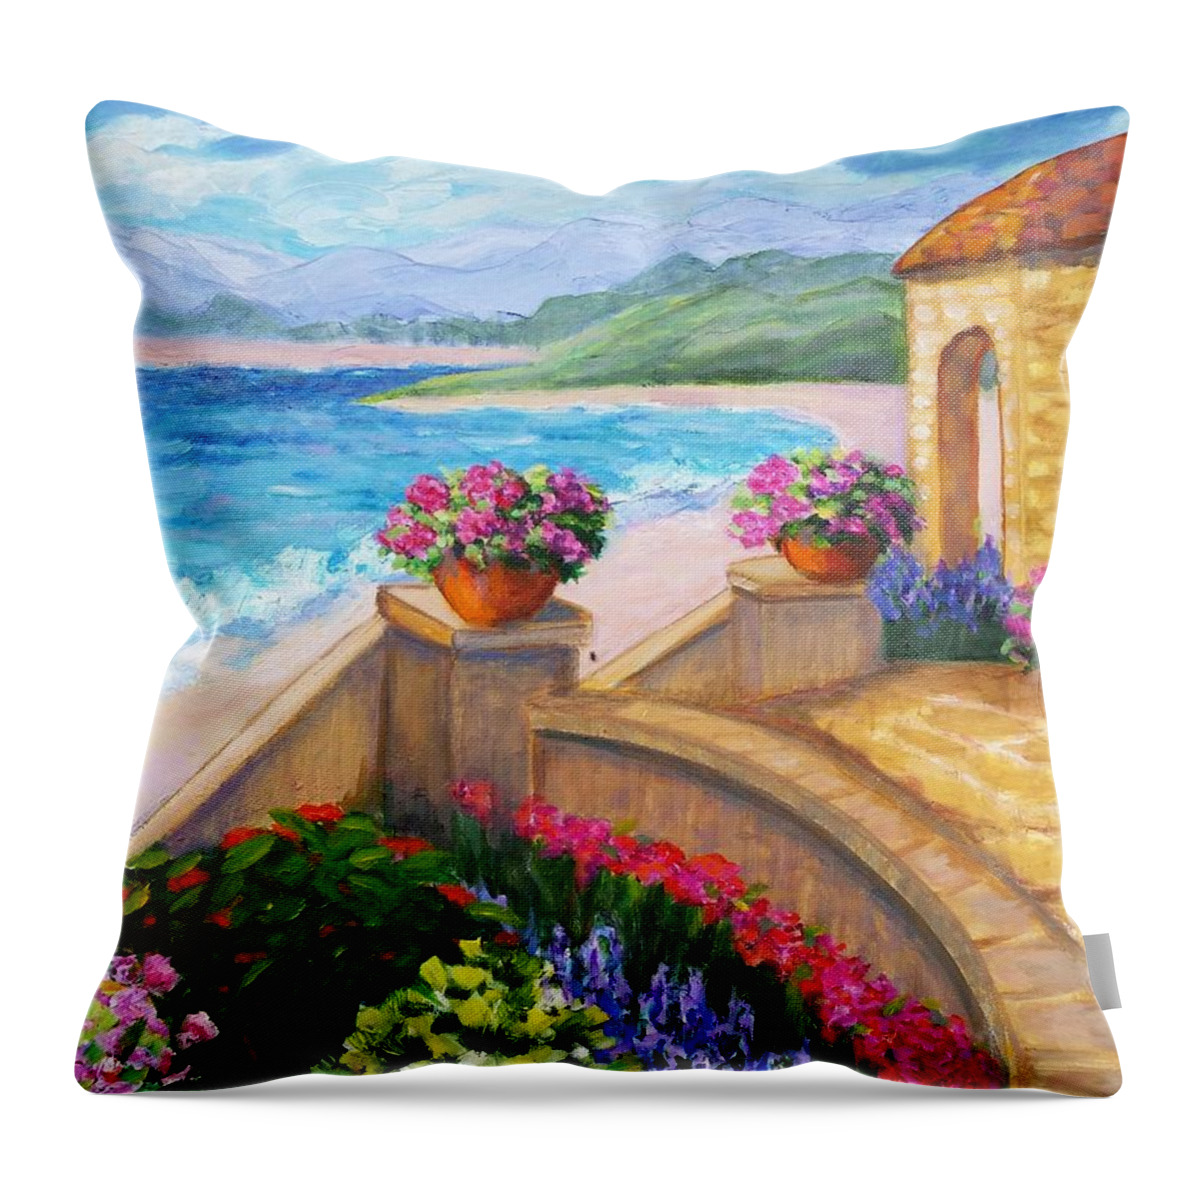 Ocean Throw Pillow featuring the painting Ocean's Edge by Rosie Sherman